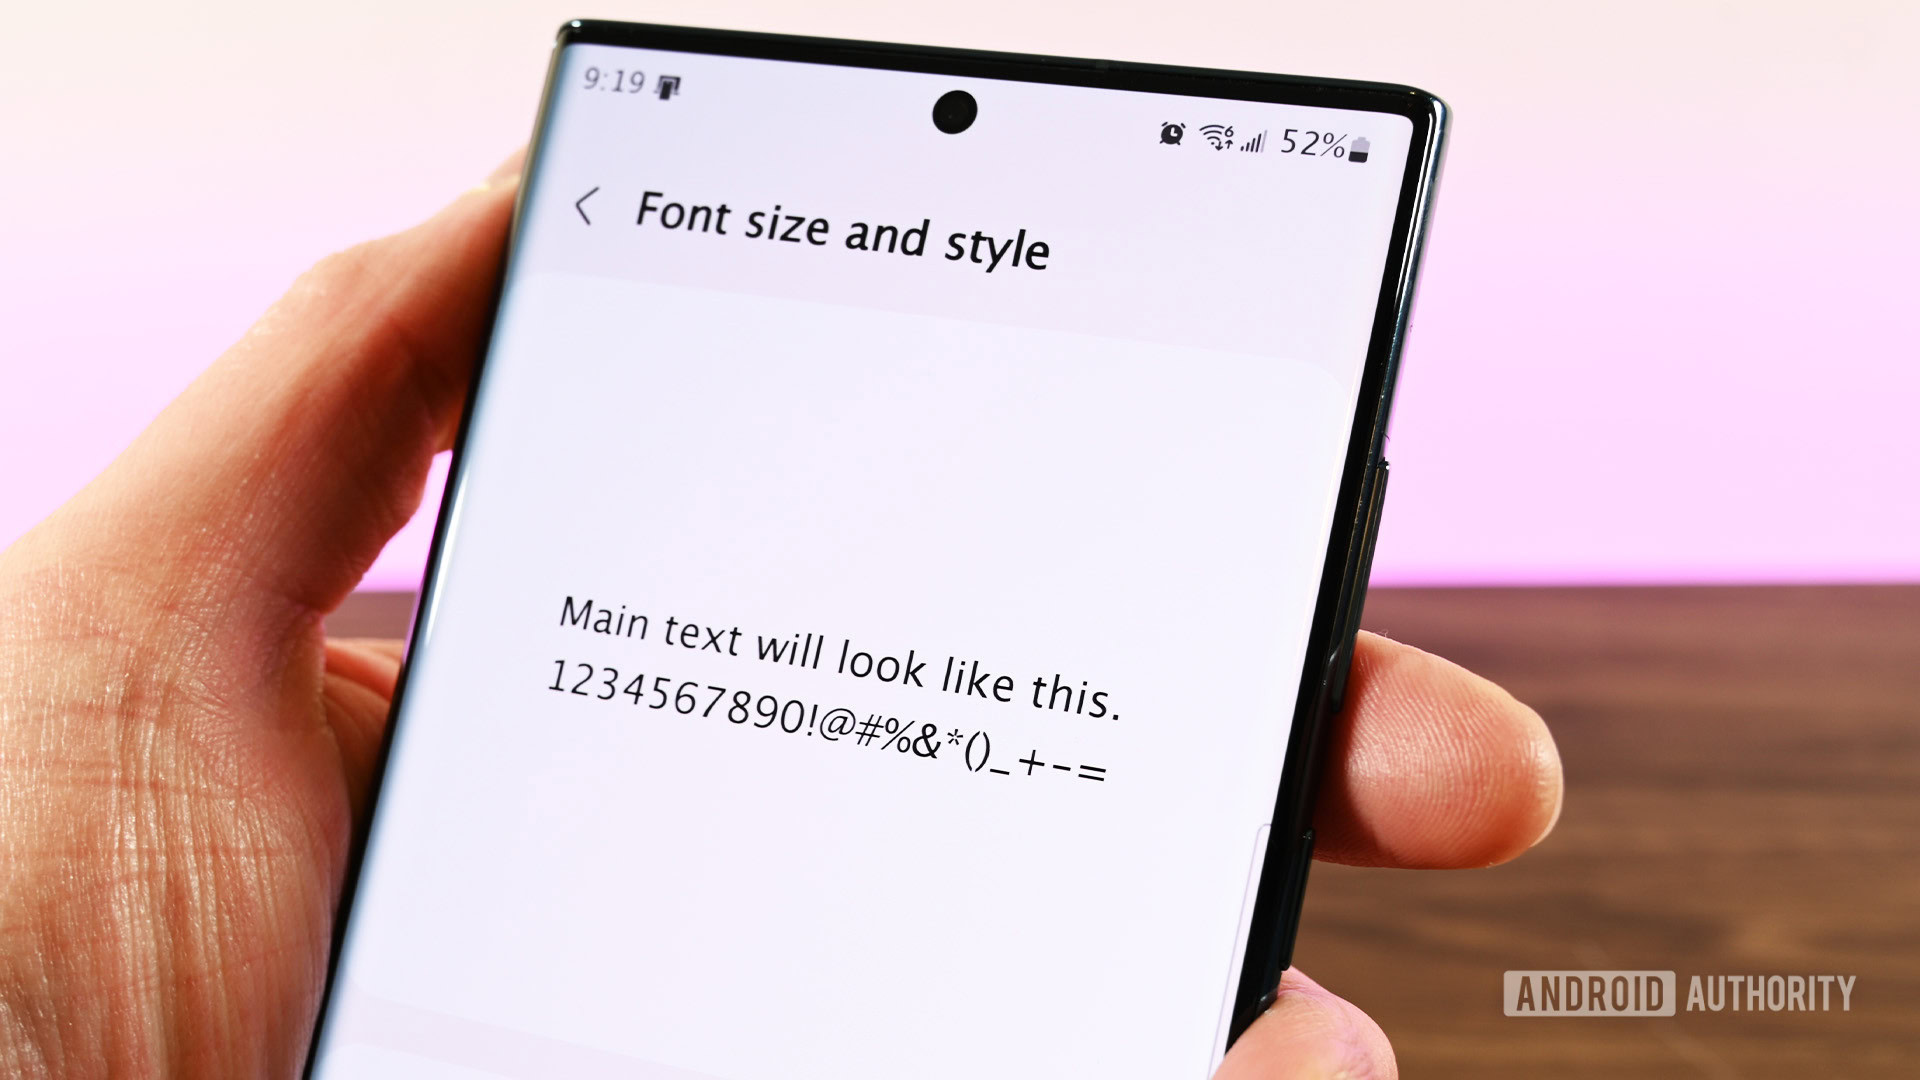 How to install fonts on Android